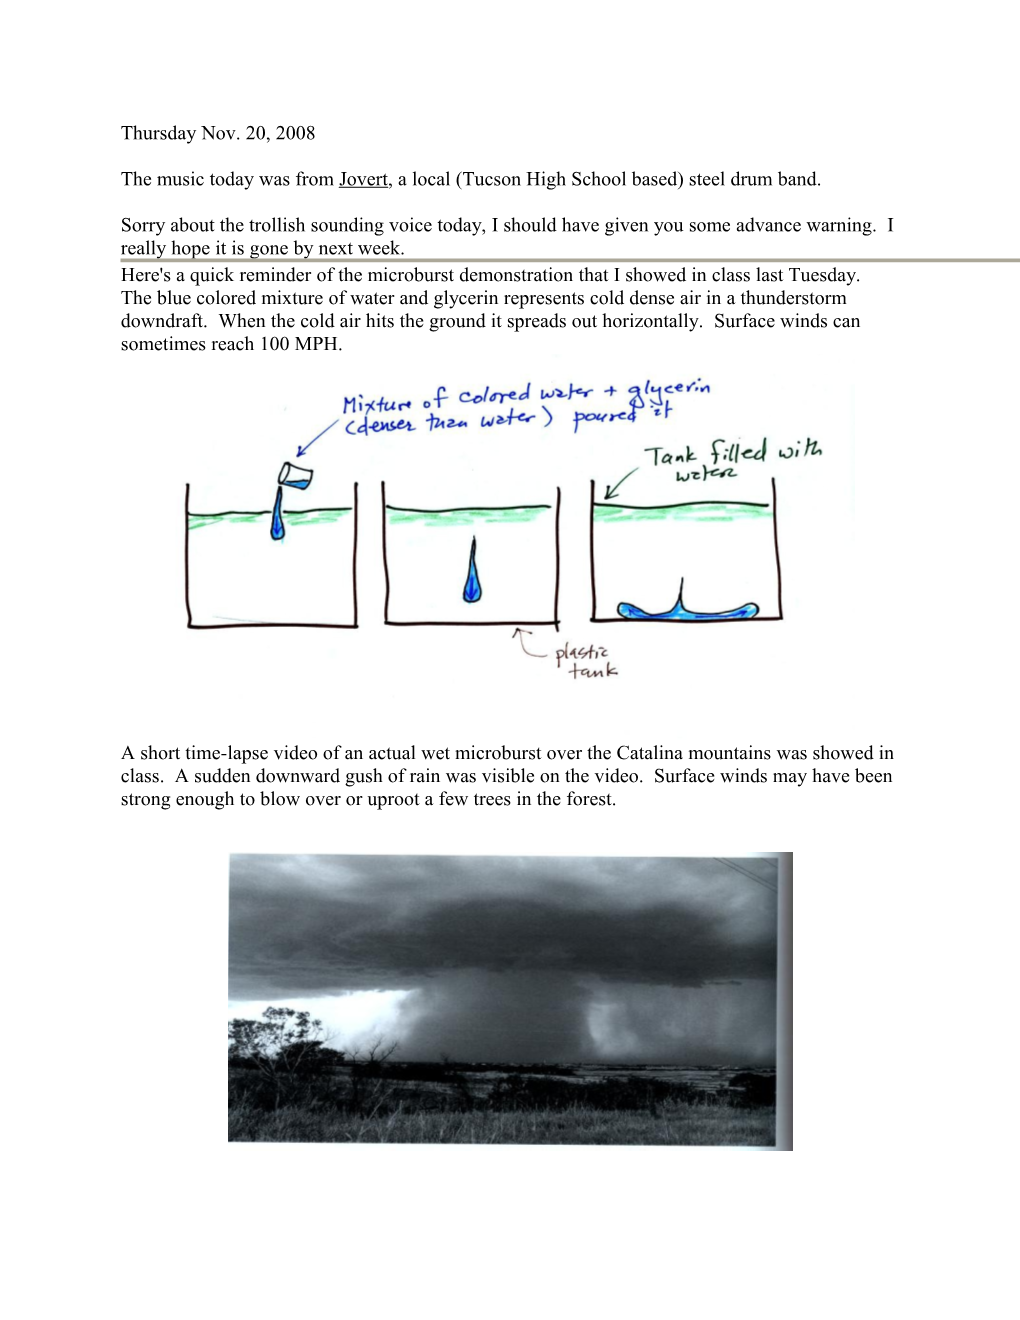 Here's a Quick Review of the 3 Stage Life Cycle of an Ordinary Air Mass Thunderstorm